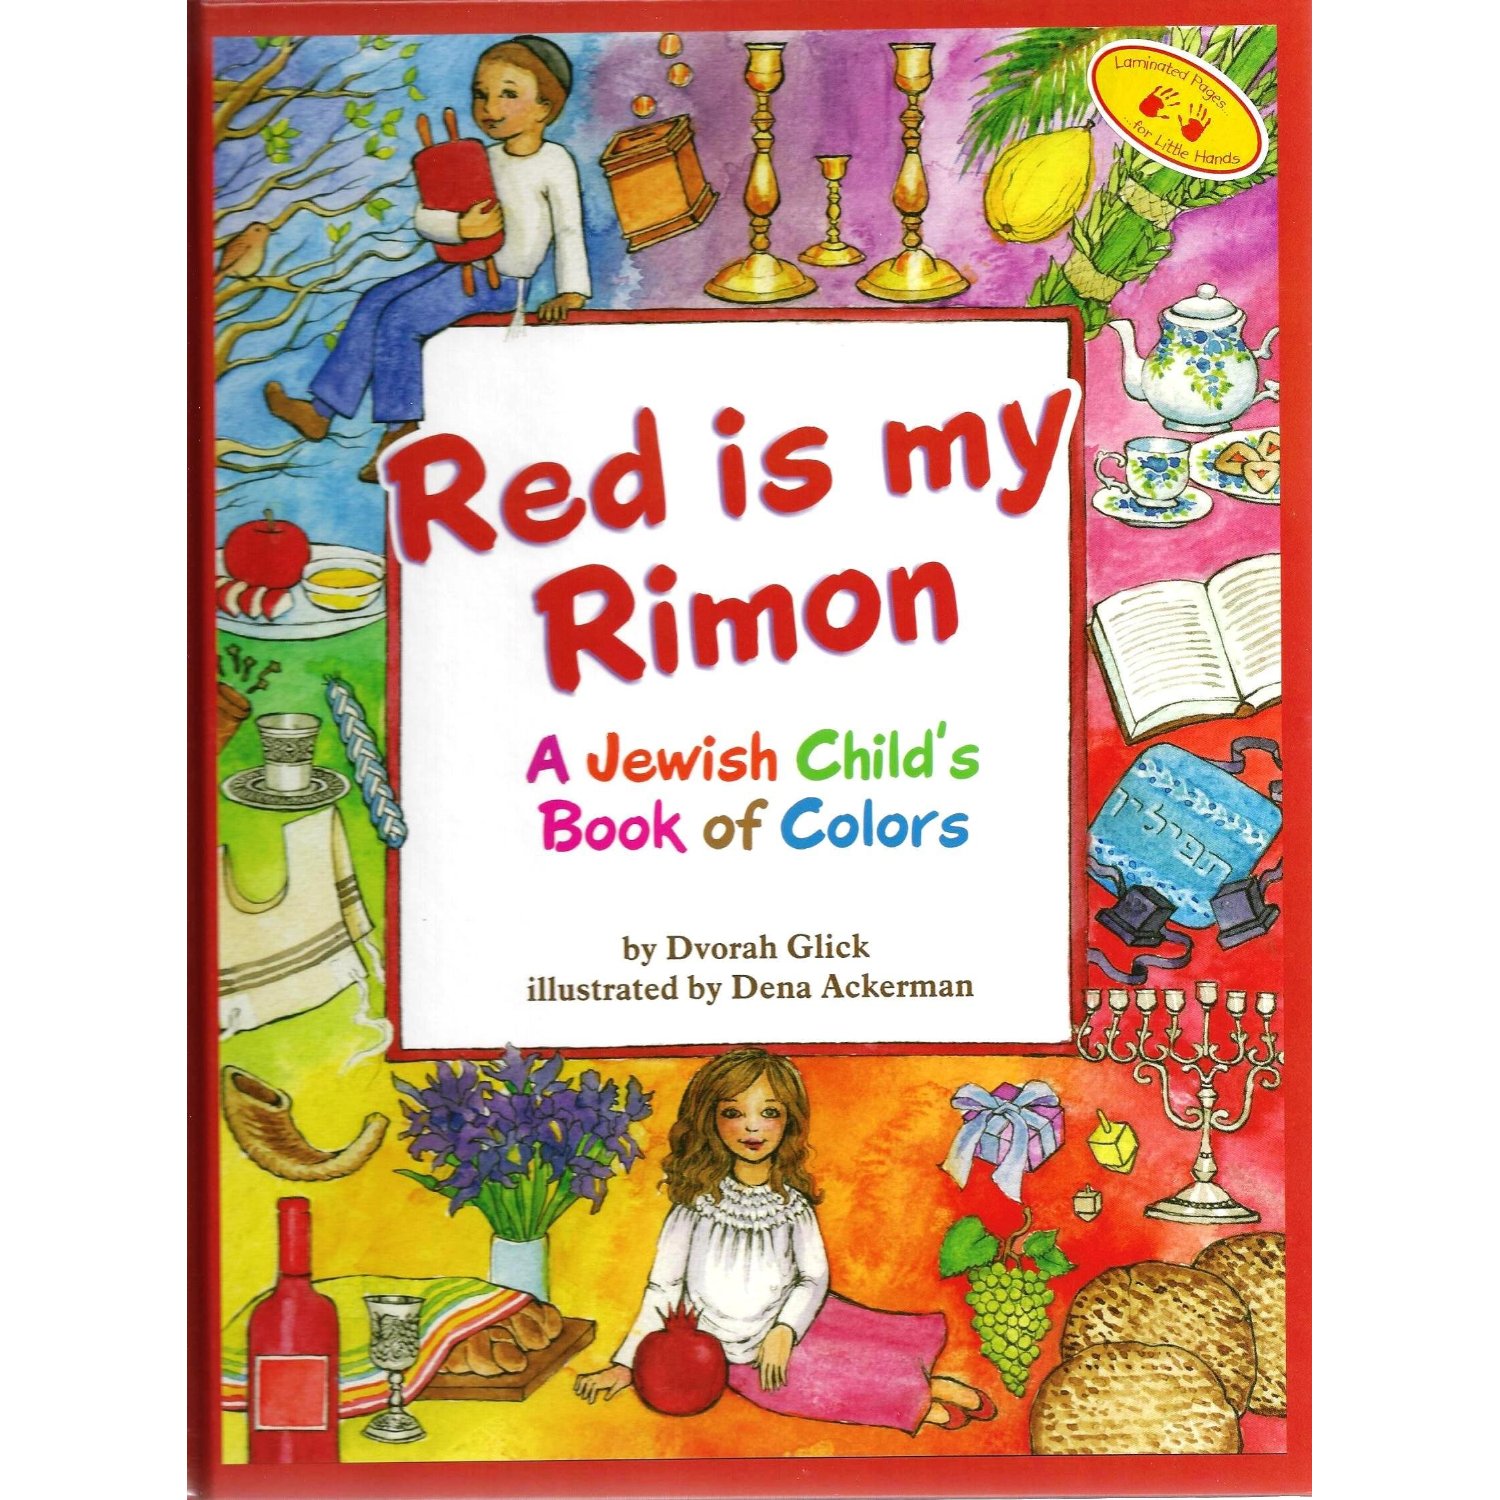 Red Is My Rimon